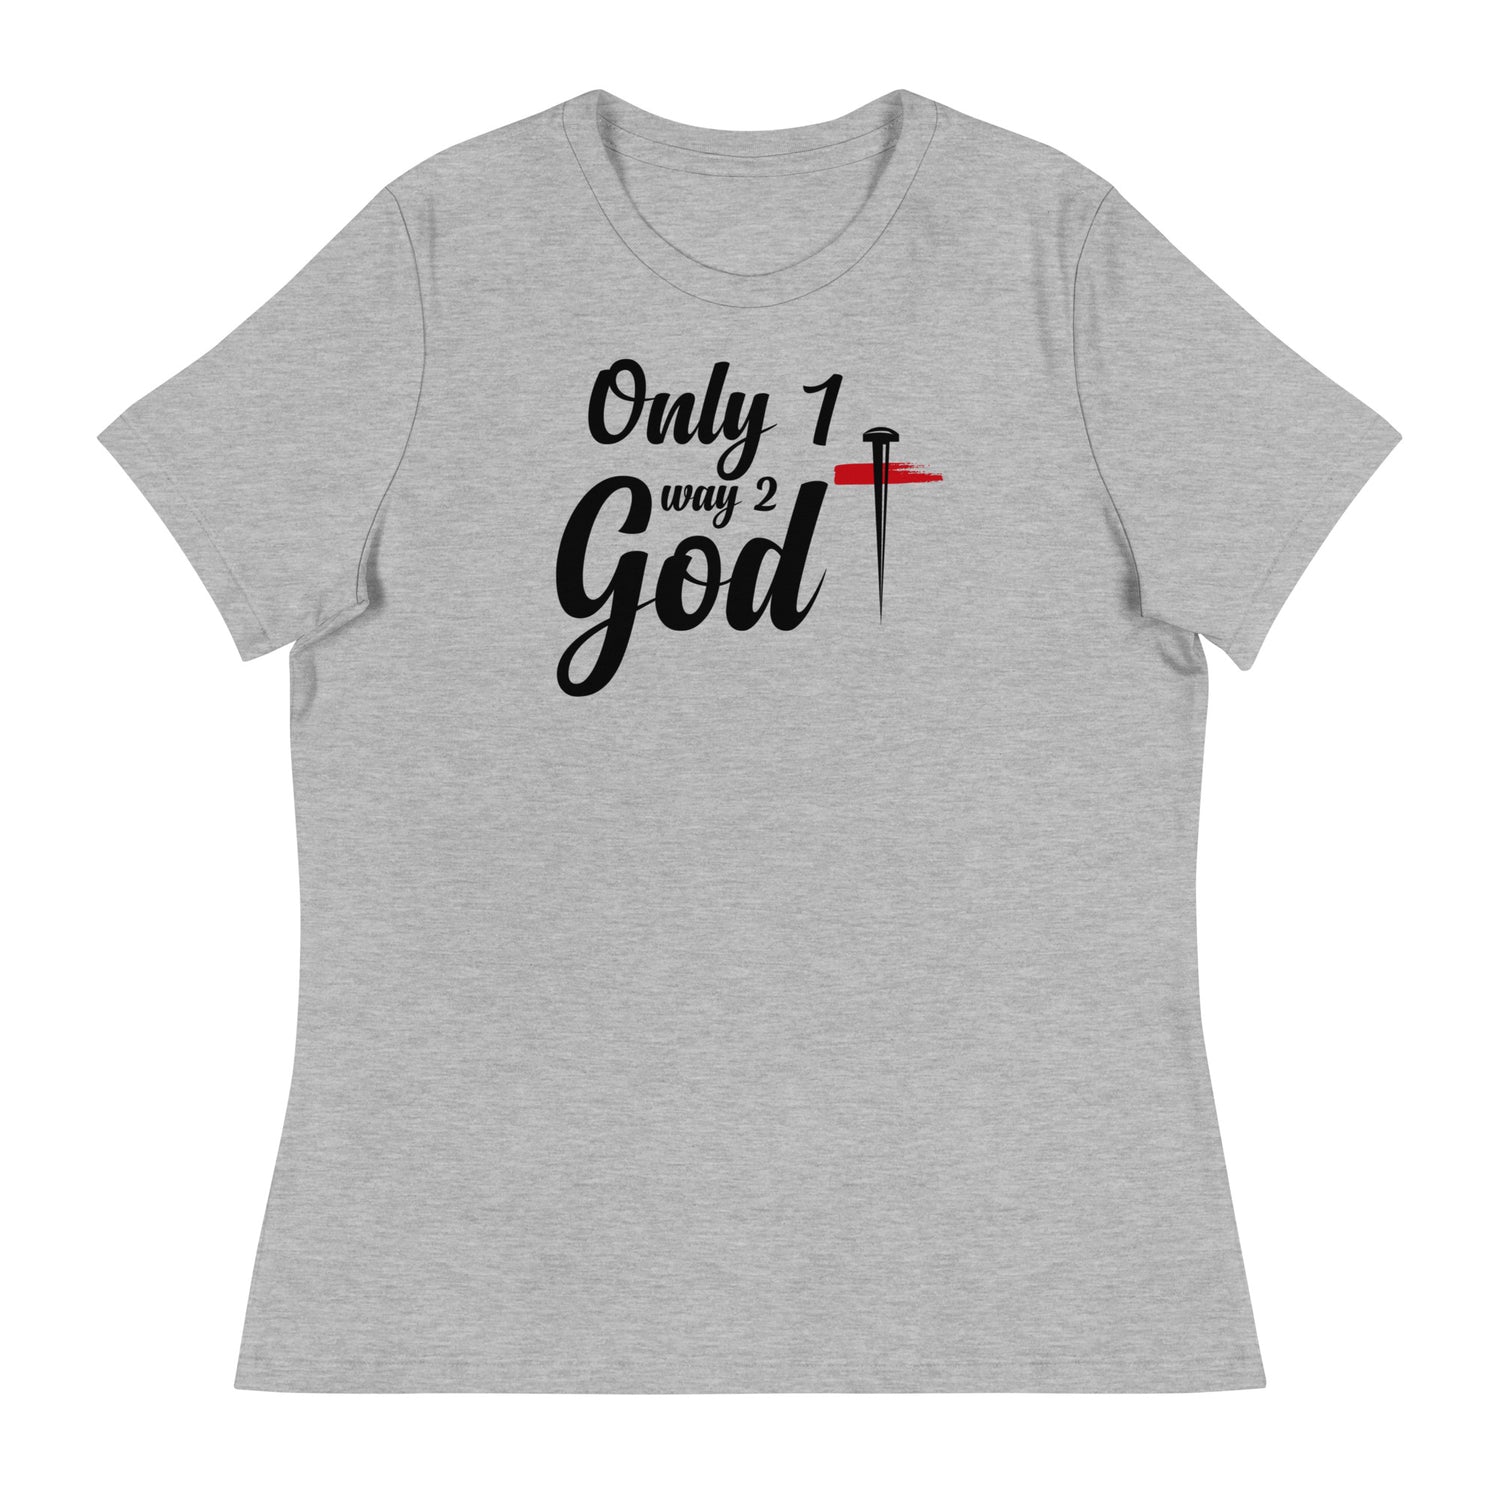 ONLY 1 WAY 2 GOD WOMENS FRONT AND BACK T-SHIRT